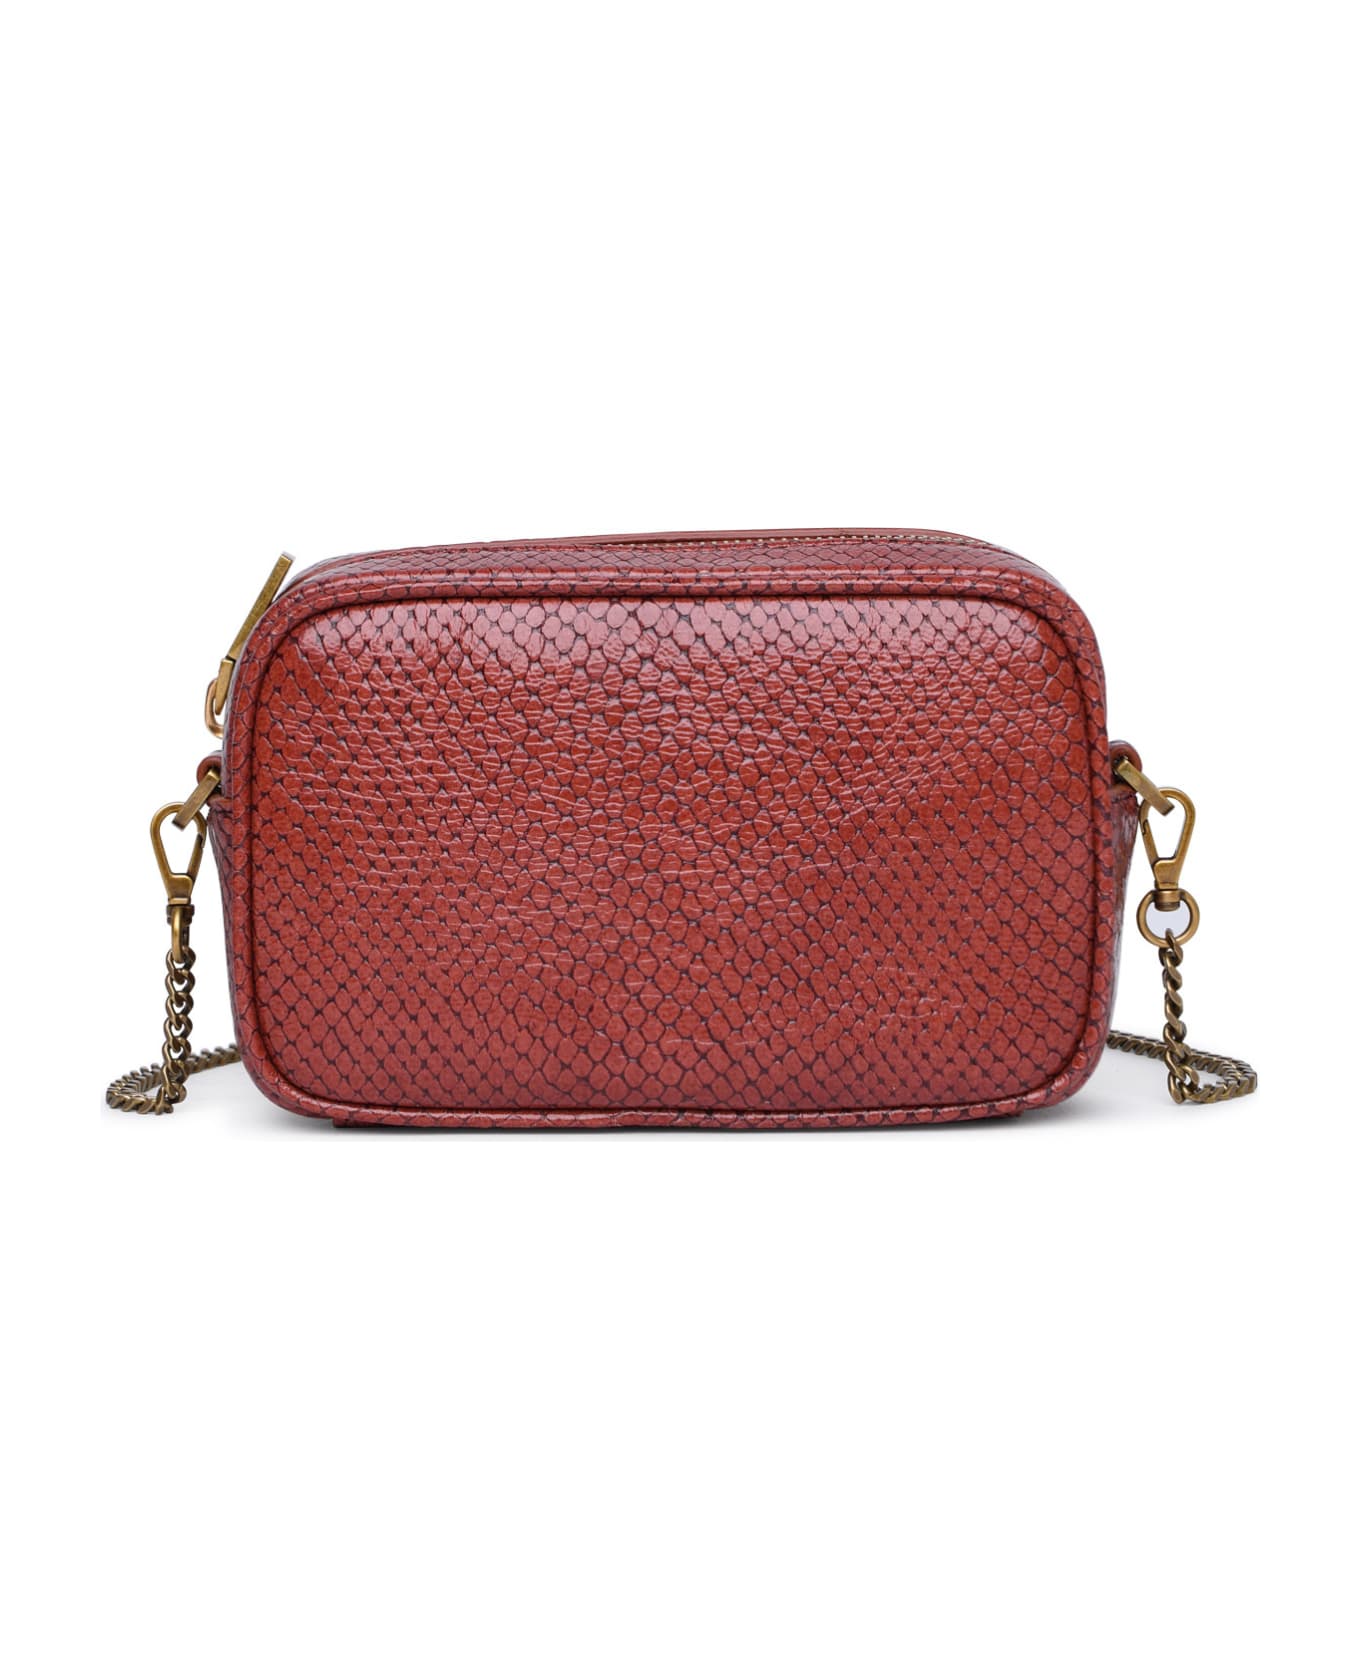 Golden Goose 'star' Mini Bag In Brown Leather - Red